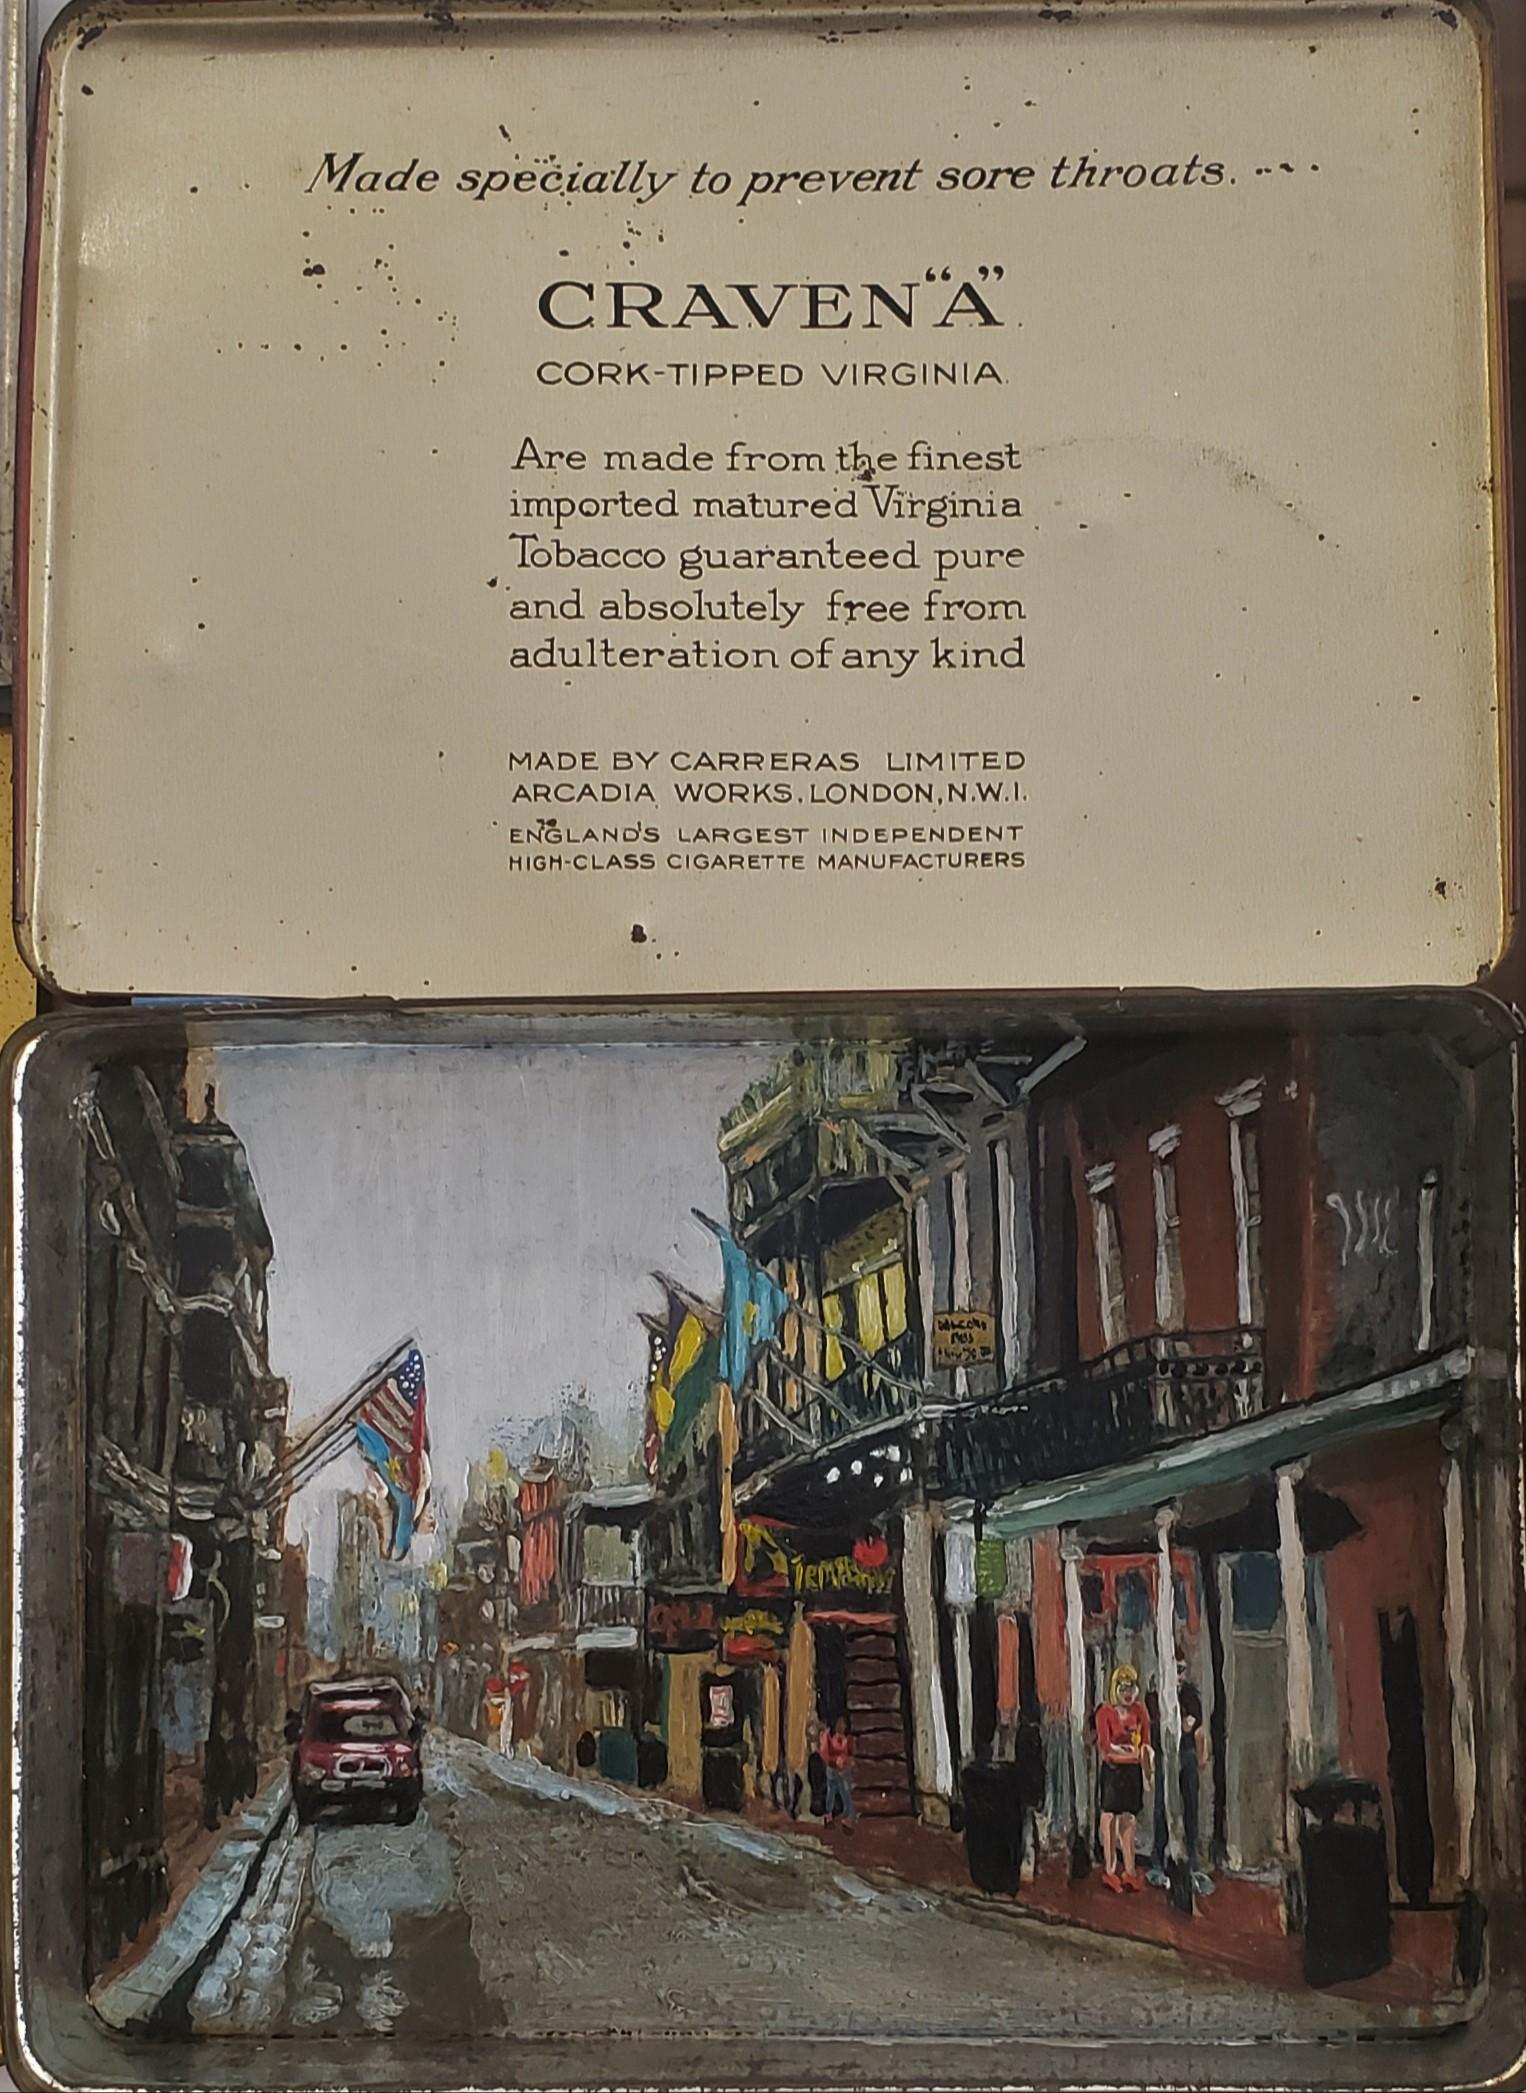   Craven  A Tobacco Tin, painted antique tobacco tins, New Orleans Street Scenes